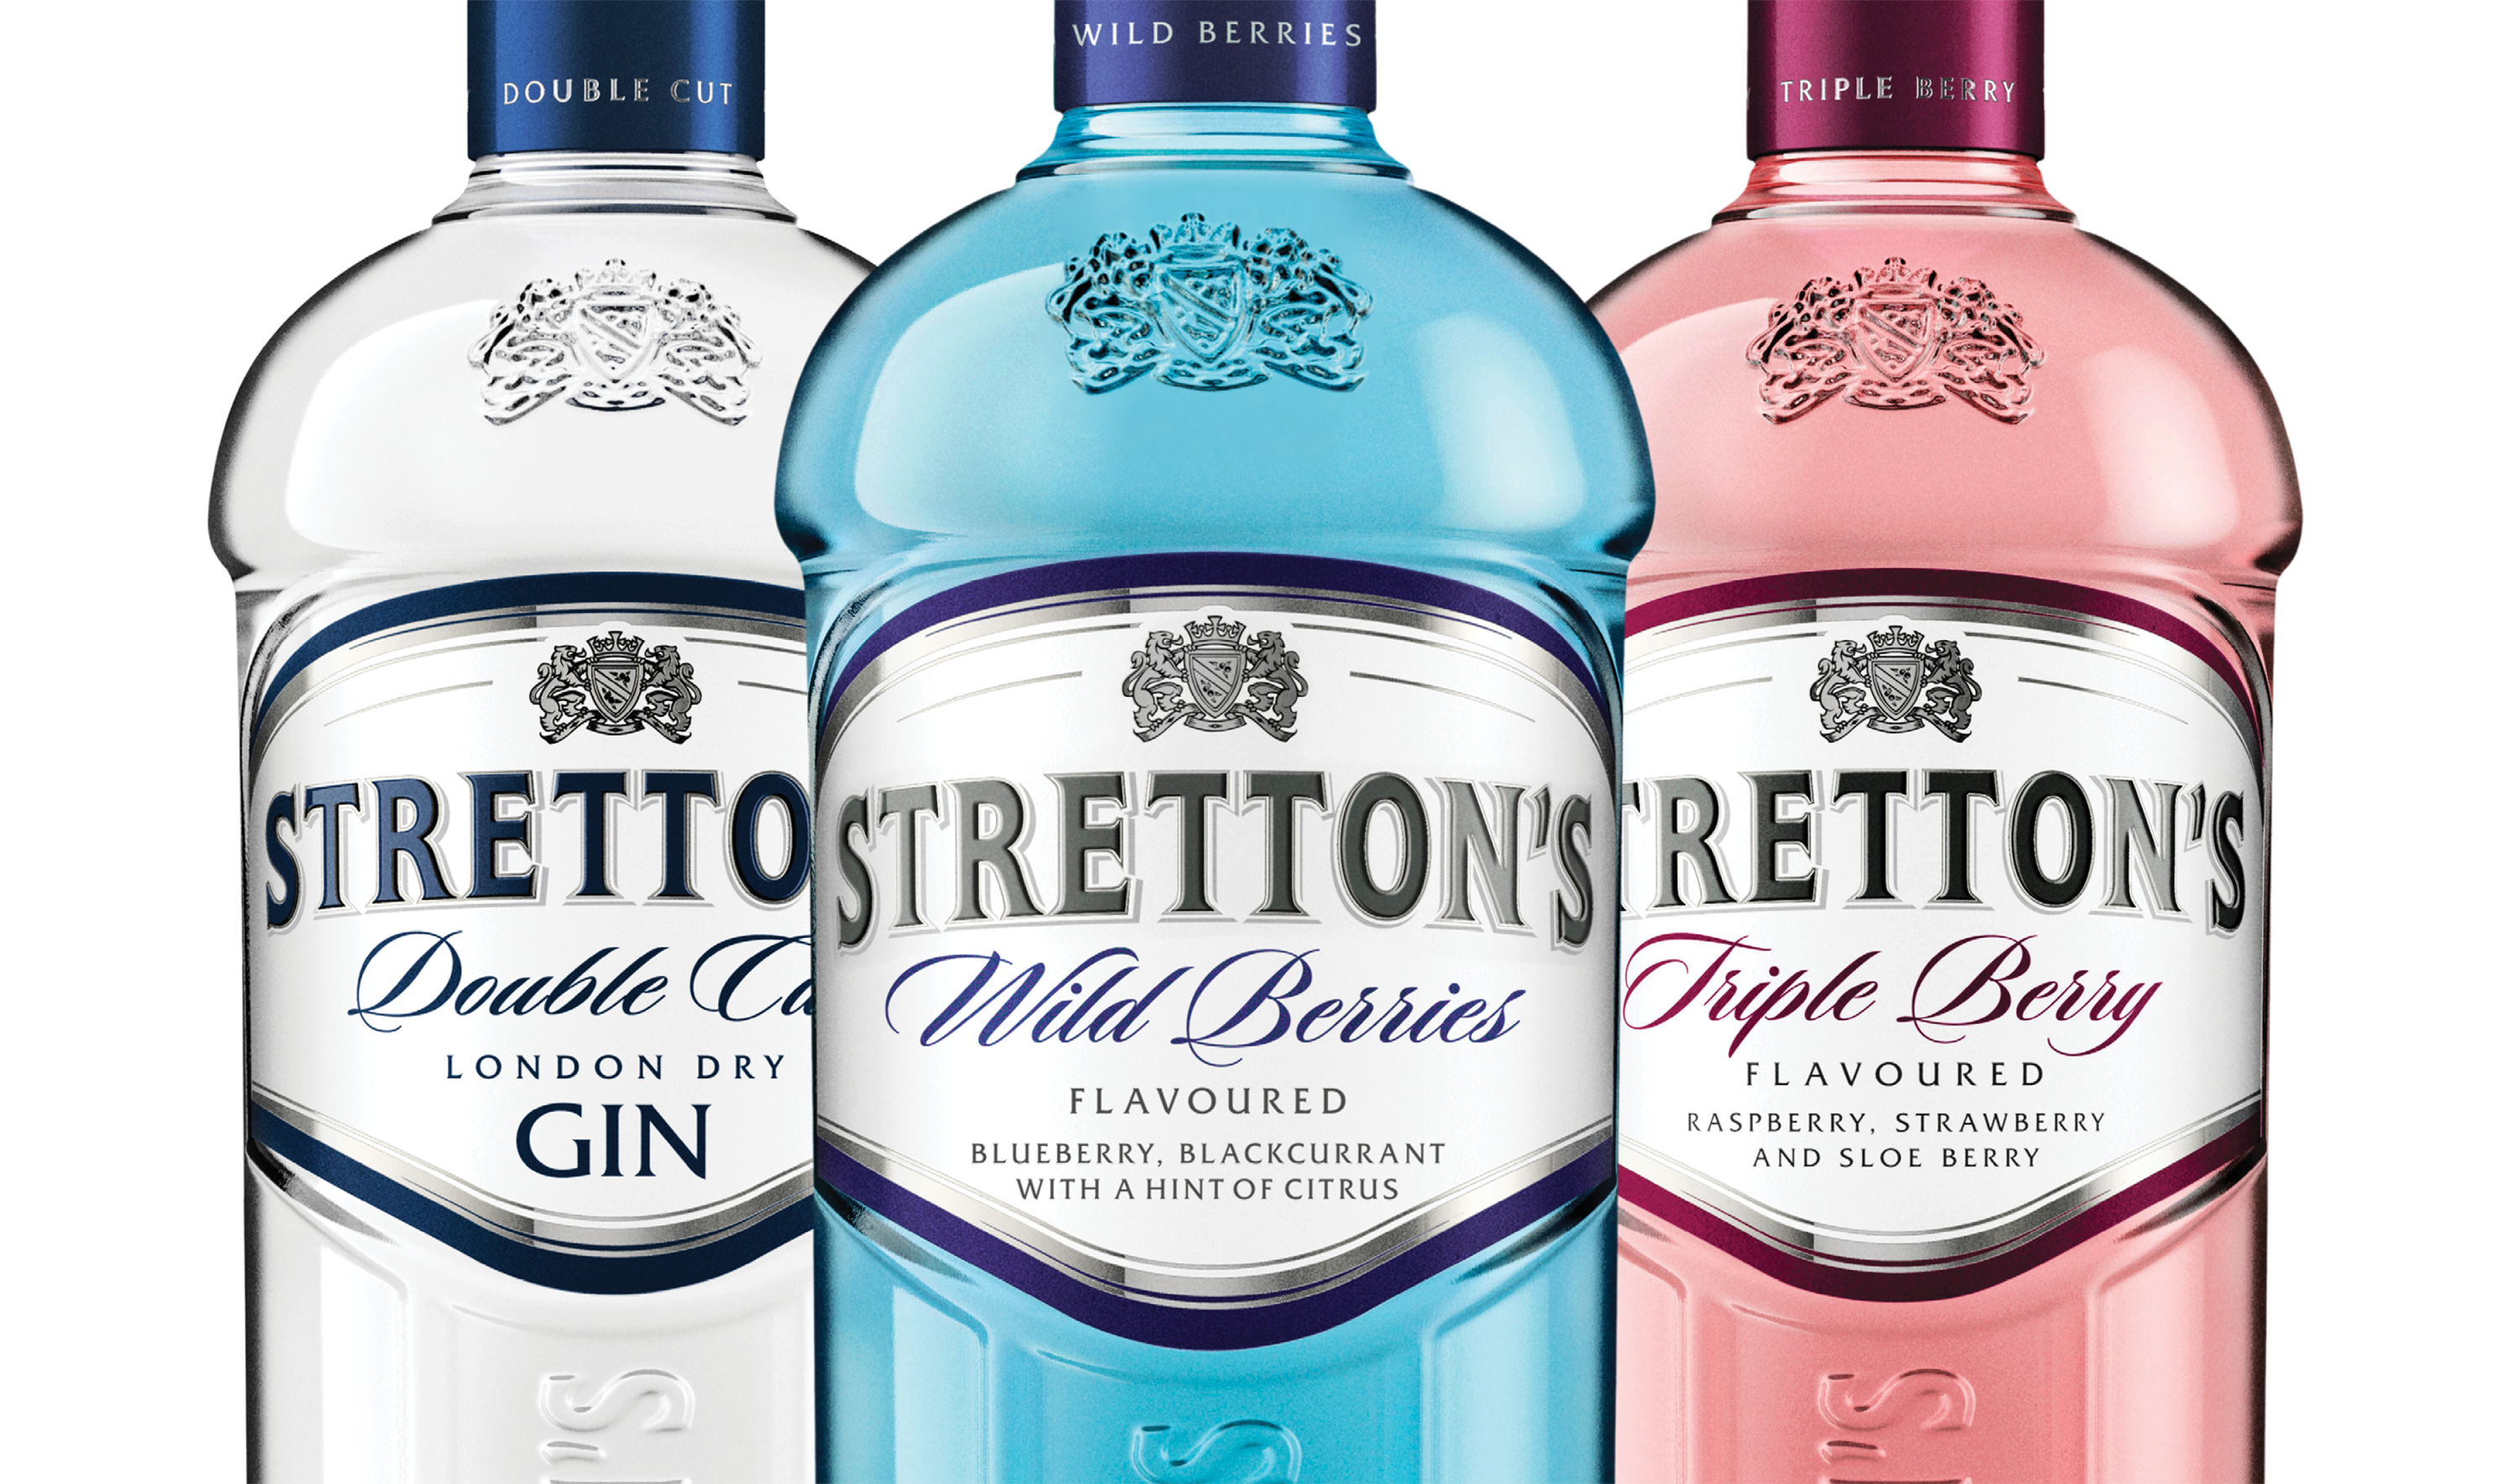 Edward Snell | How Stretton’s London Dry Is Taking The Snobbery Out Of Gin